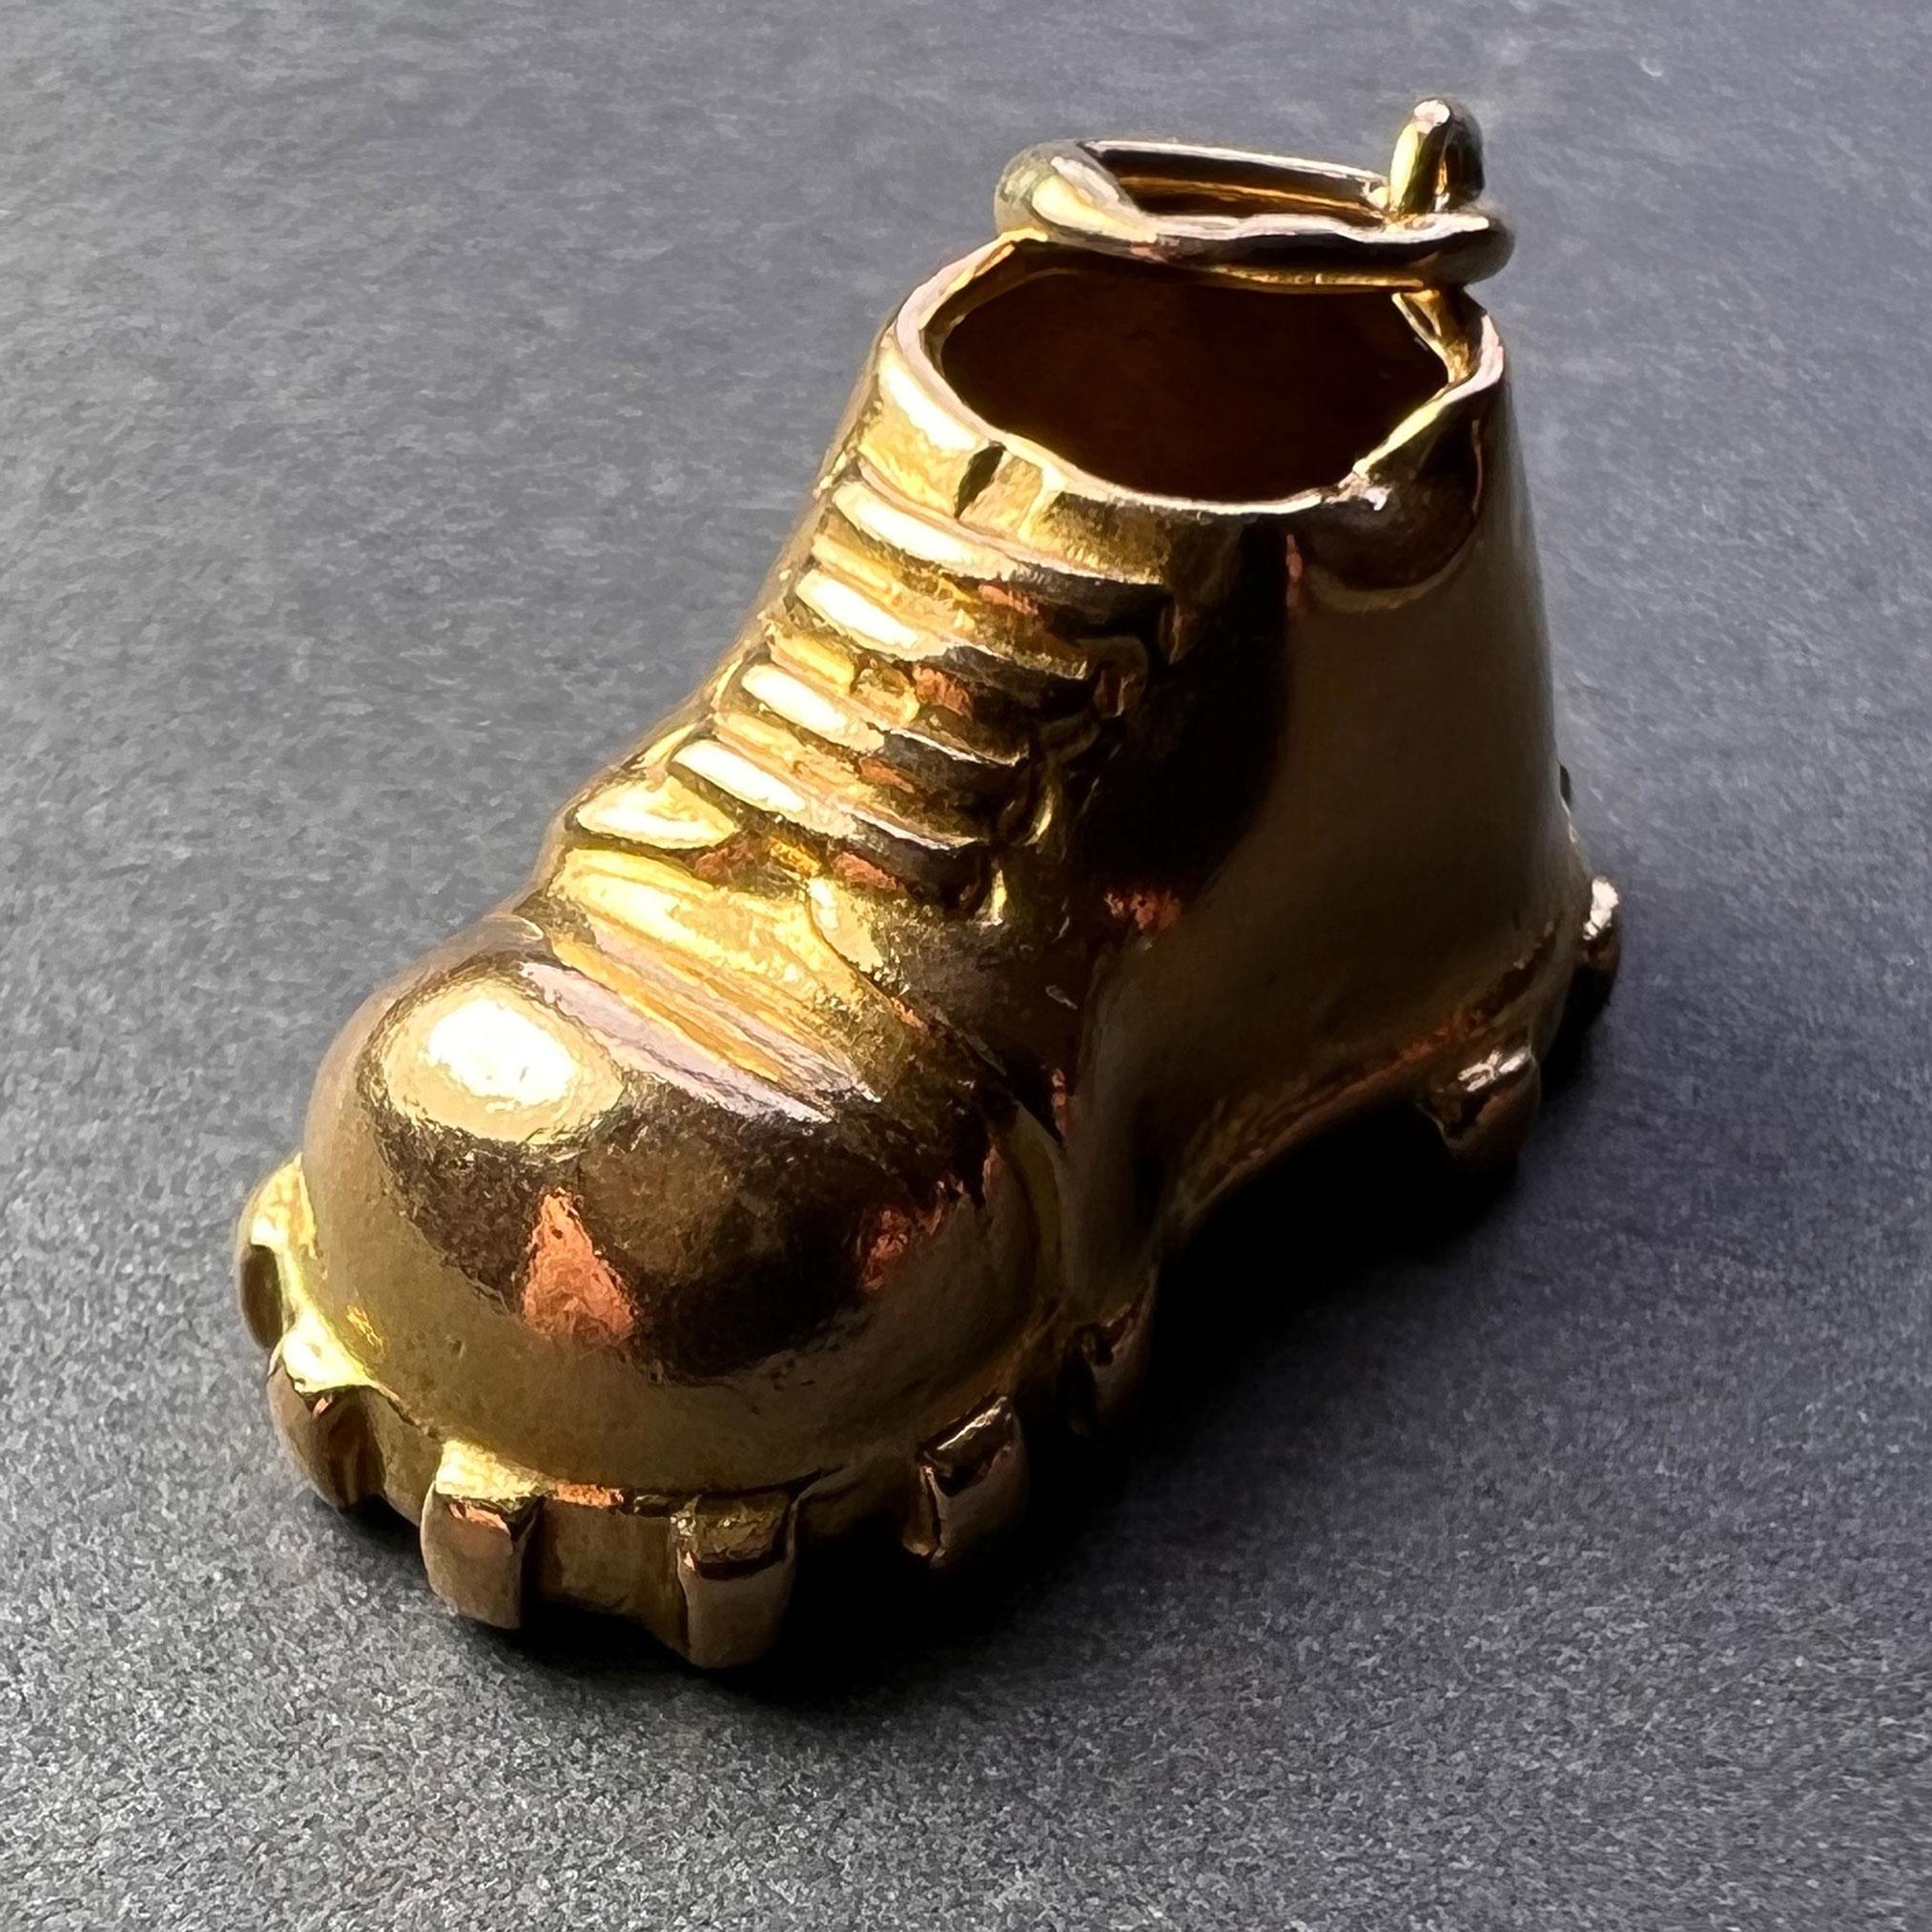 An 18 karat (18K) yellow gold charm pendant designed as a shoe with hobnail detail to the base in the style of Aaron Basha. Unmarked but tested for 18 karat gold.
 
Dimensions: 1 x 1.8 x 1 cm (not including jump ring)
Weight: 3.03 grams 
(Chain not